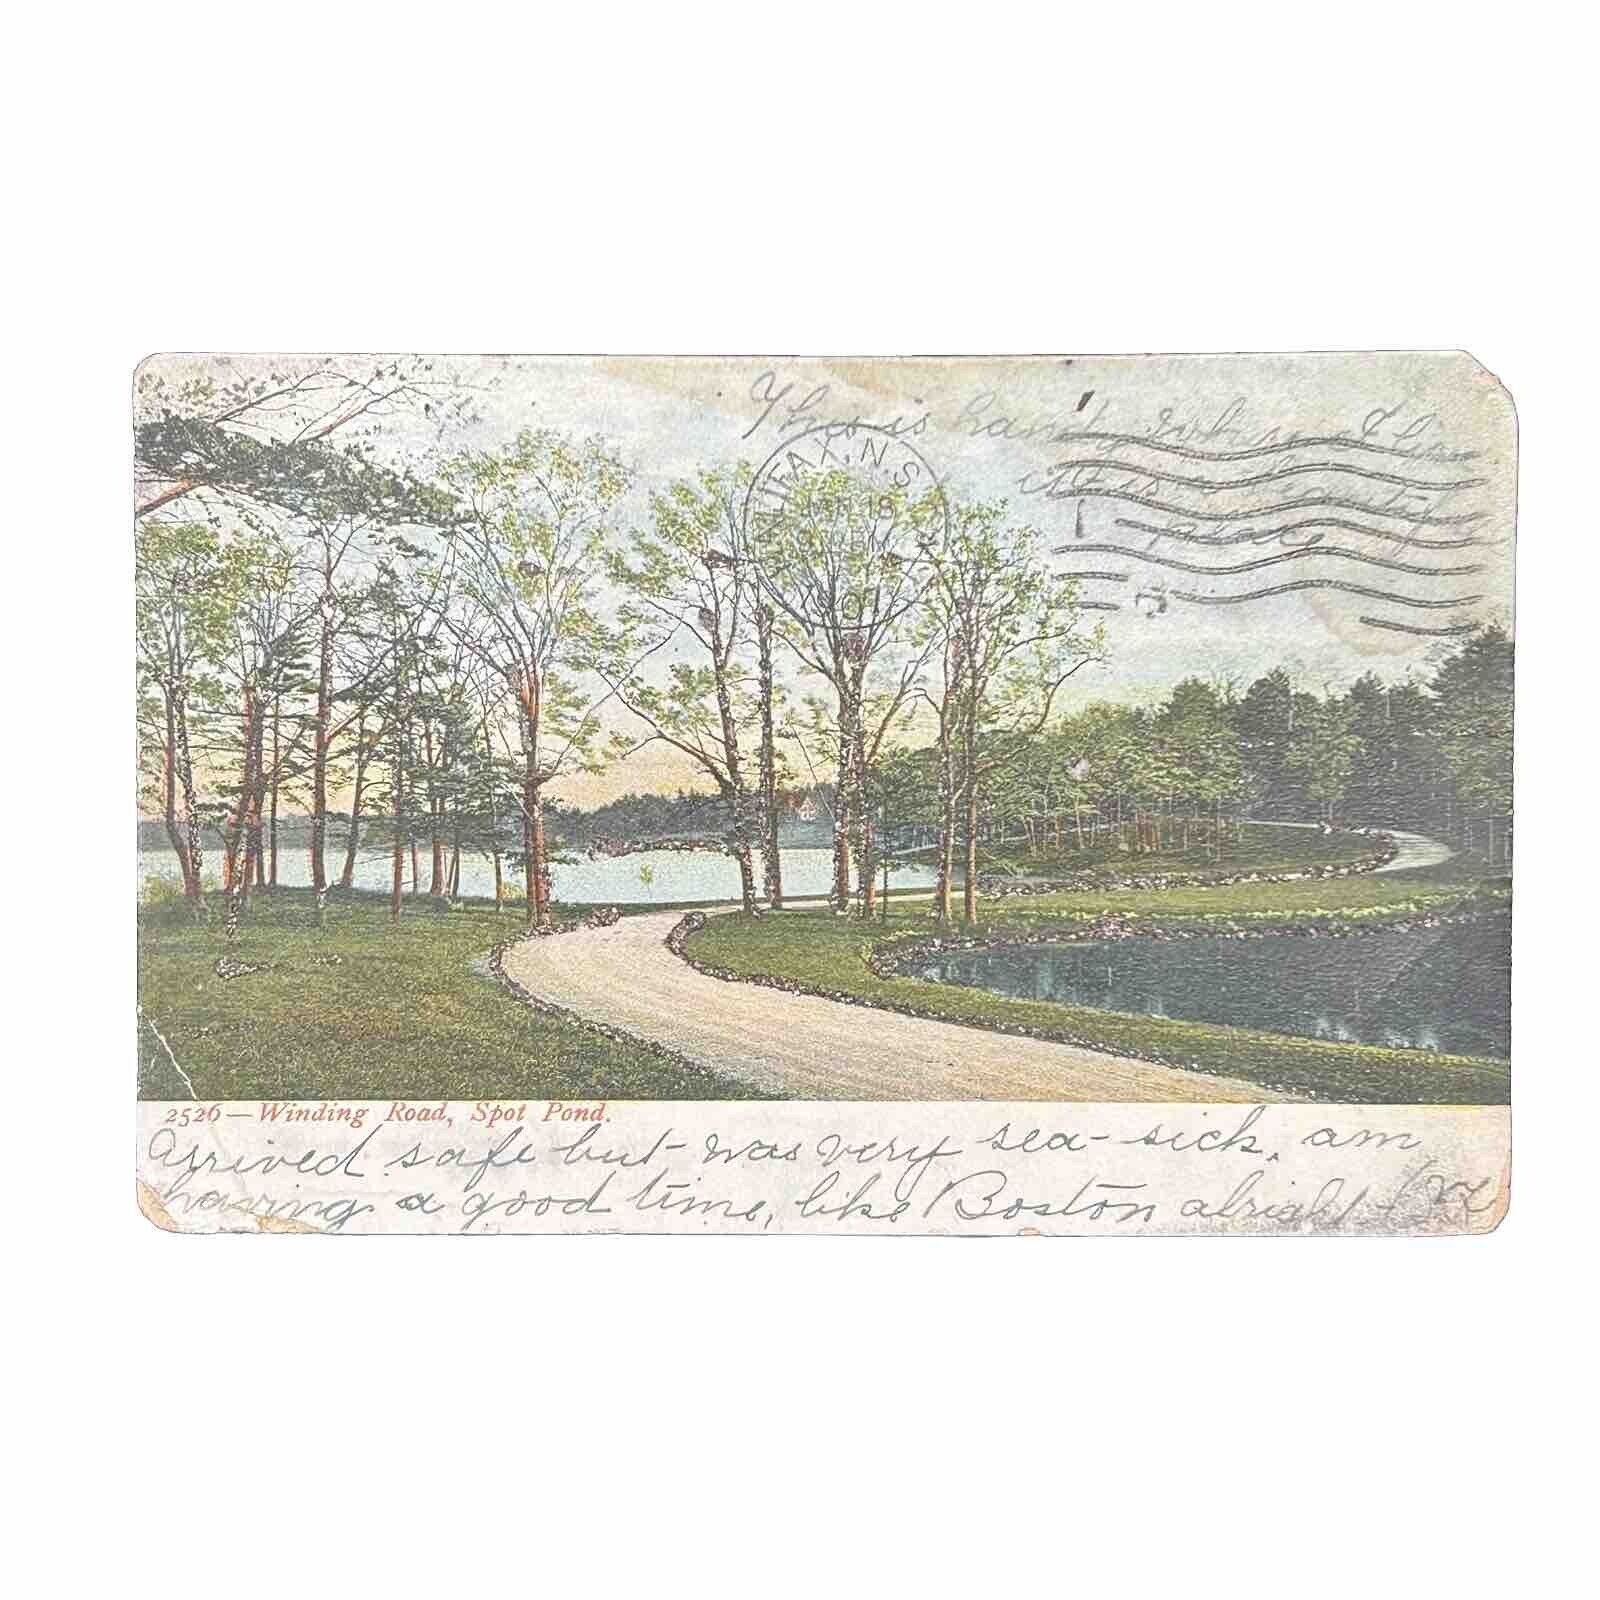 1907 Vintage Post Card: Winding Road , Spot Pond. With Postmarks